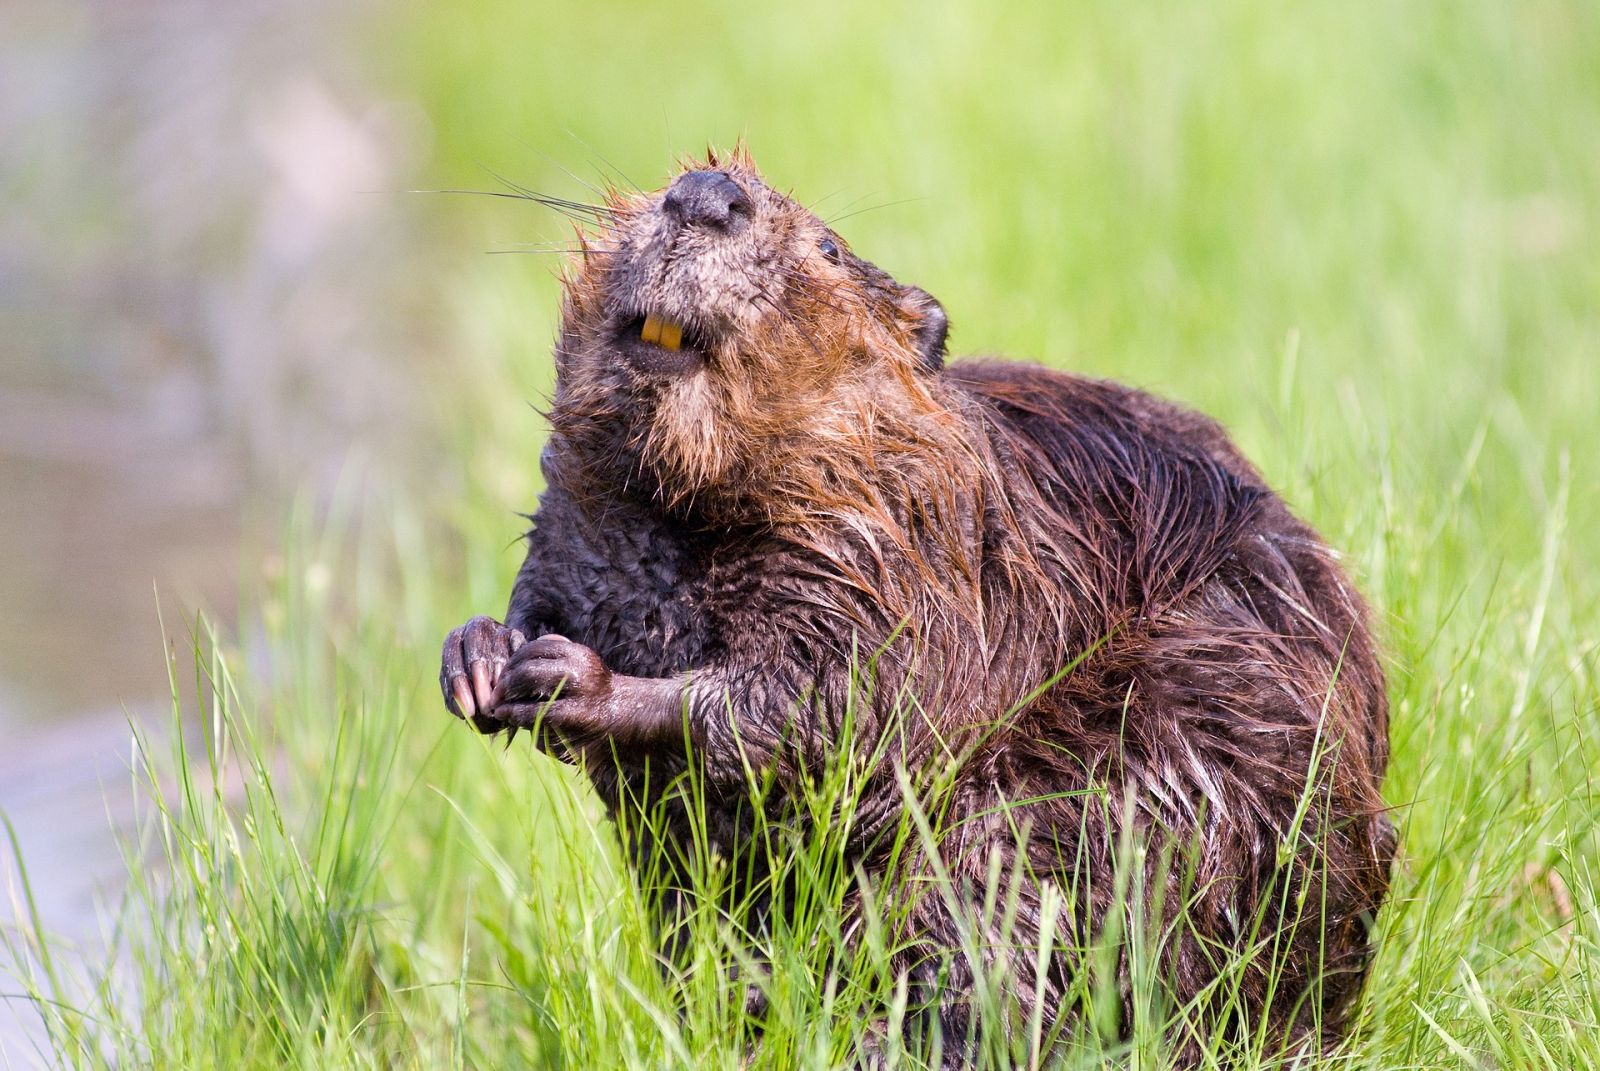 Beavers in our National Parks?